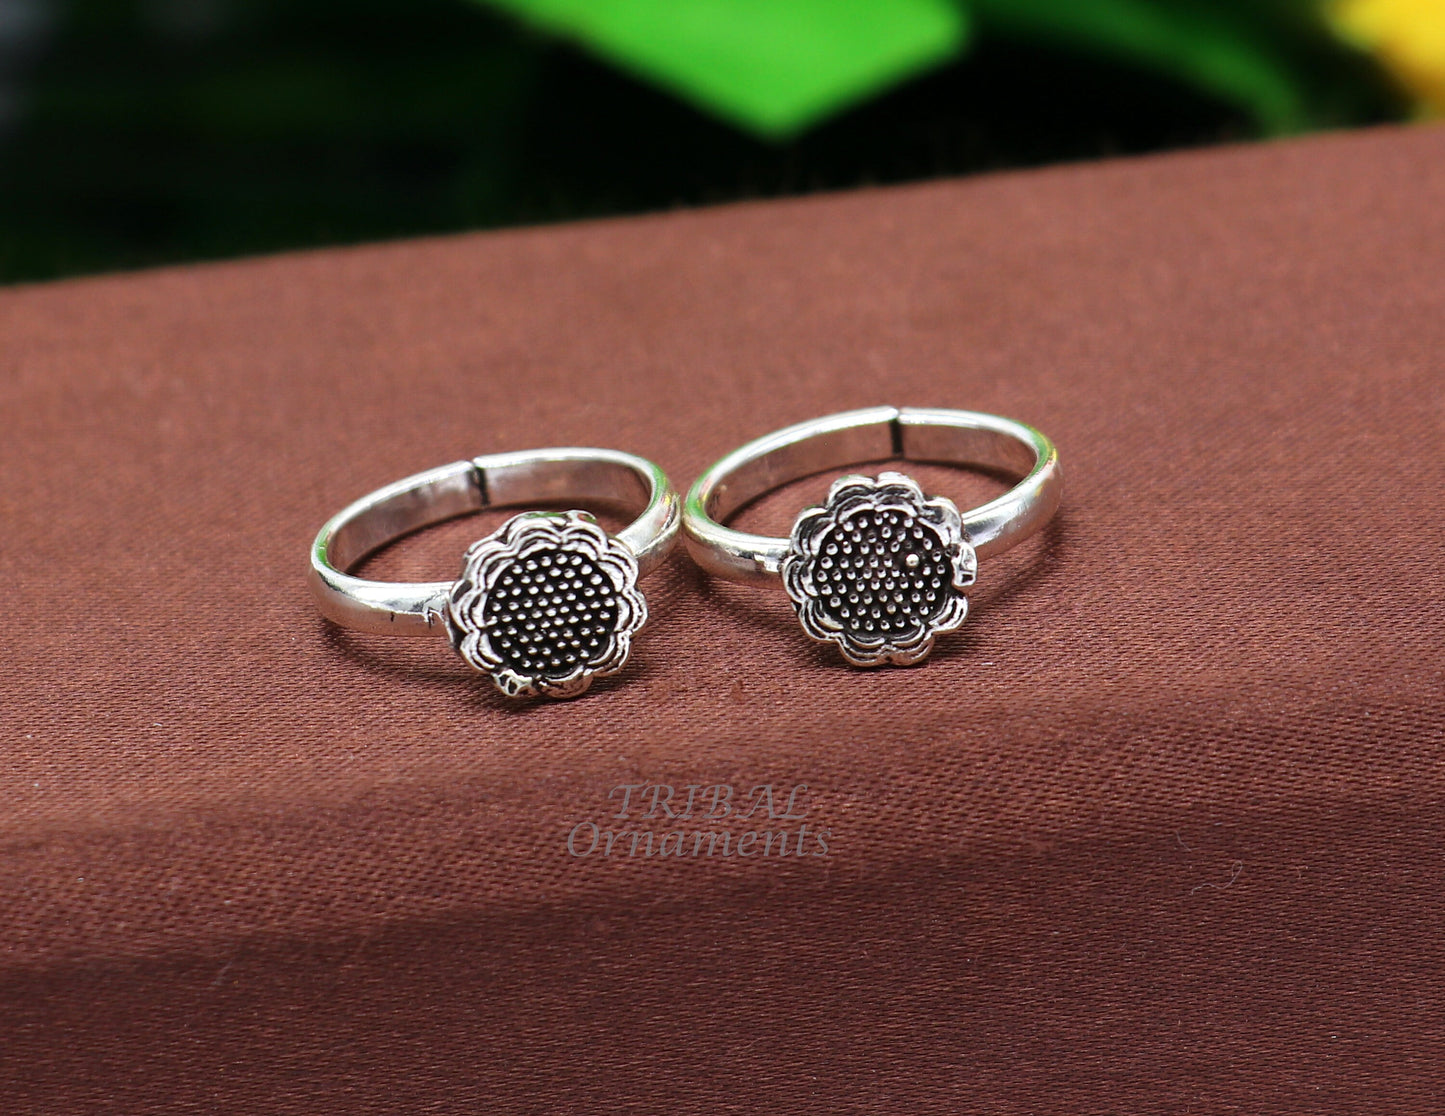 925 sterling silver handmade unique classical stylish vintage tribal ethnic toe ring best brides gifting jewelry ytr68 - TRIBAL ORNAMENTS